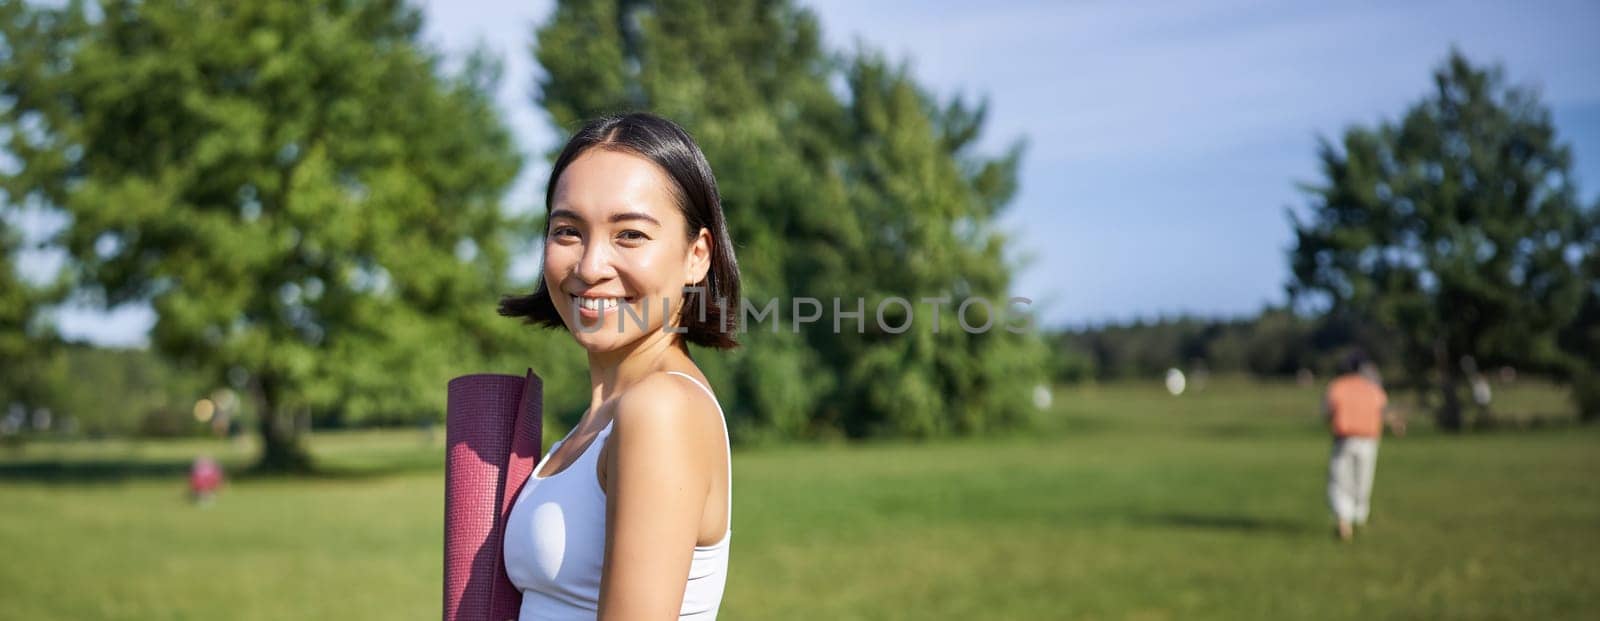 Smiling fitness girl with rubber mat, stands in park wearing uniform for workout and sport activities, does yoga outdoors on lawn.